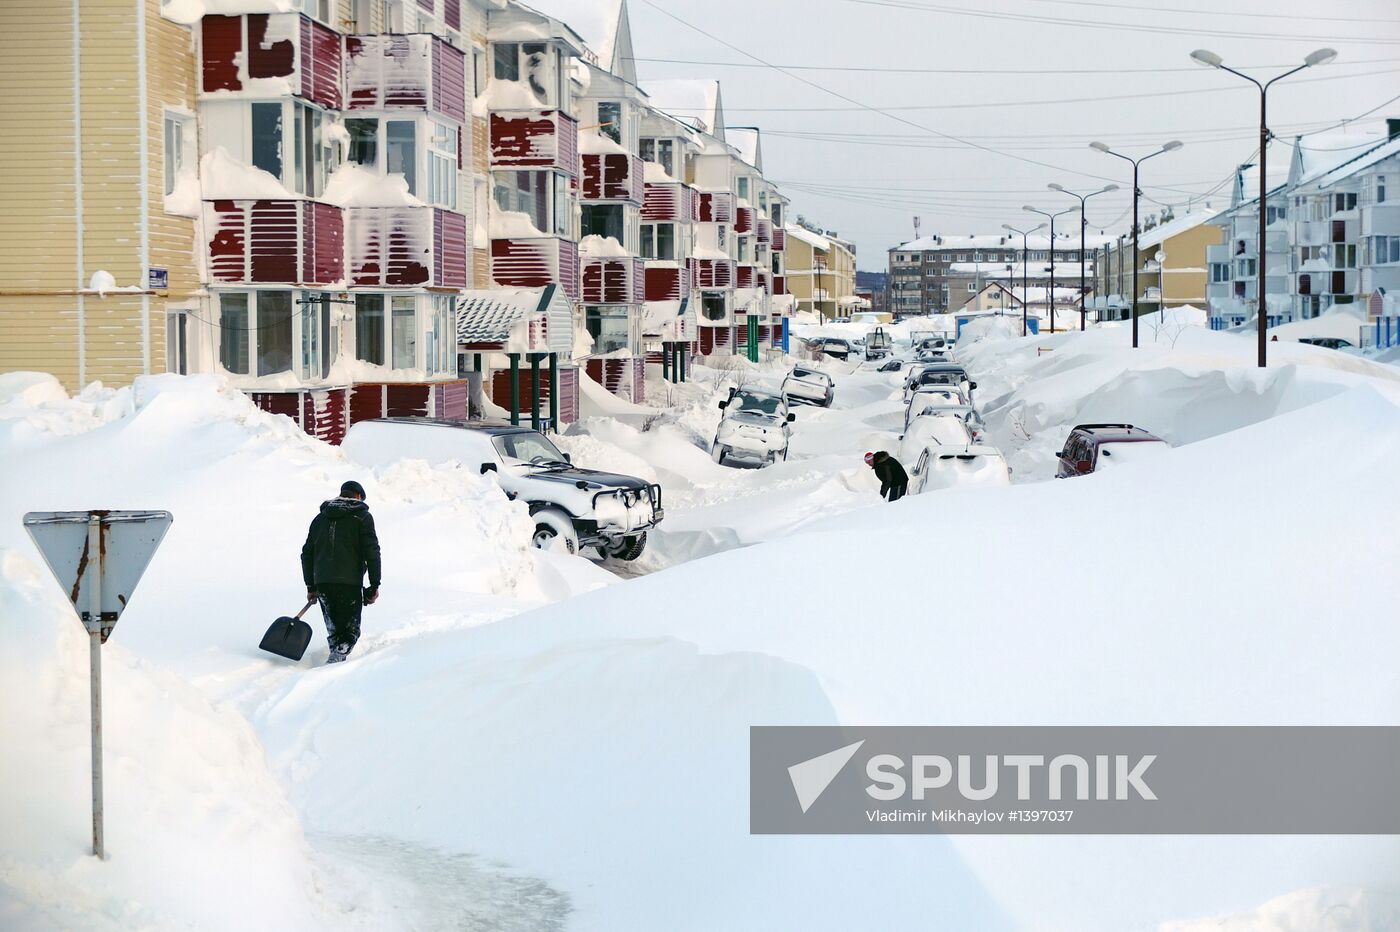 Aftermath of a snowstorm in Sakhalin